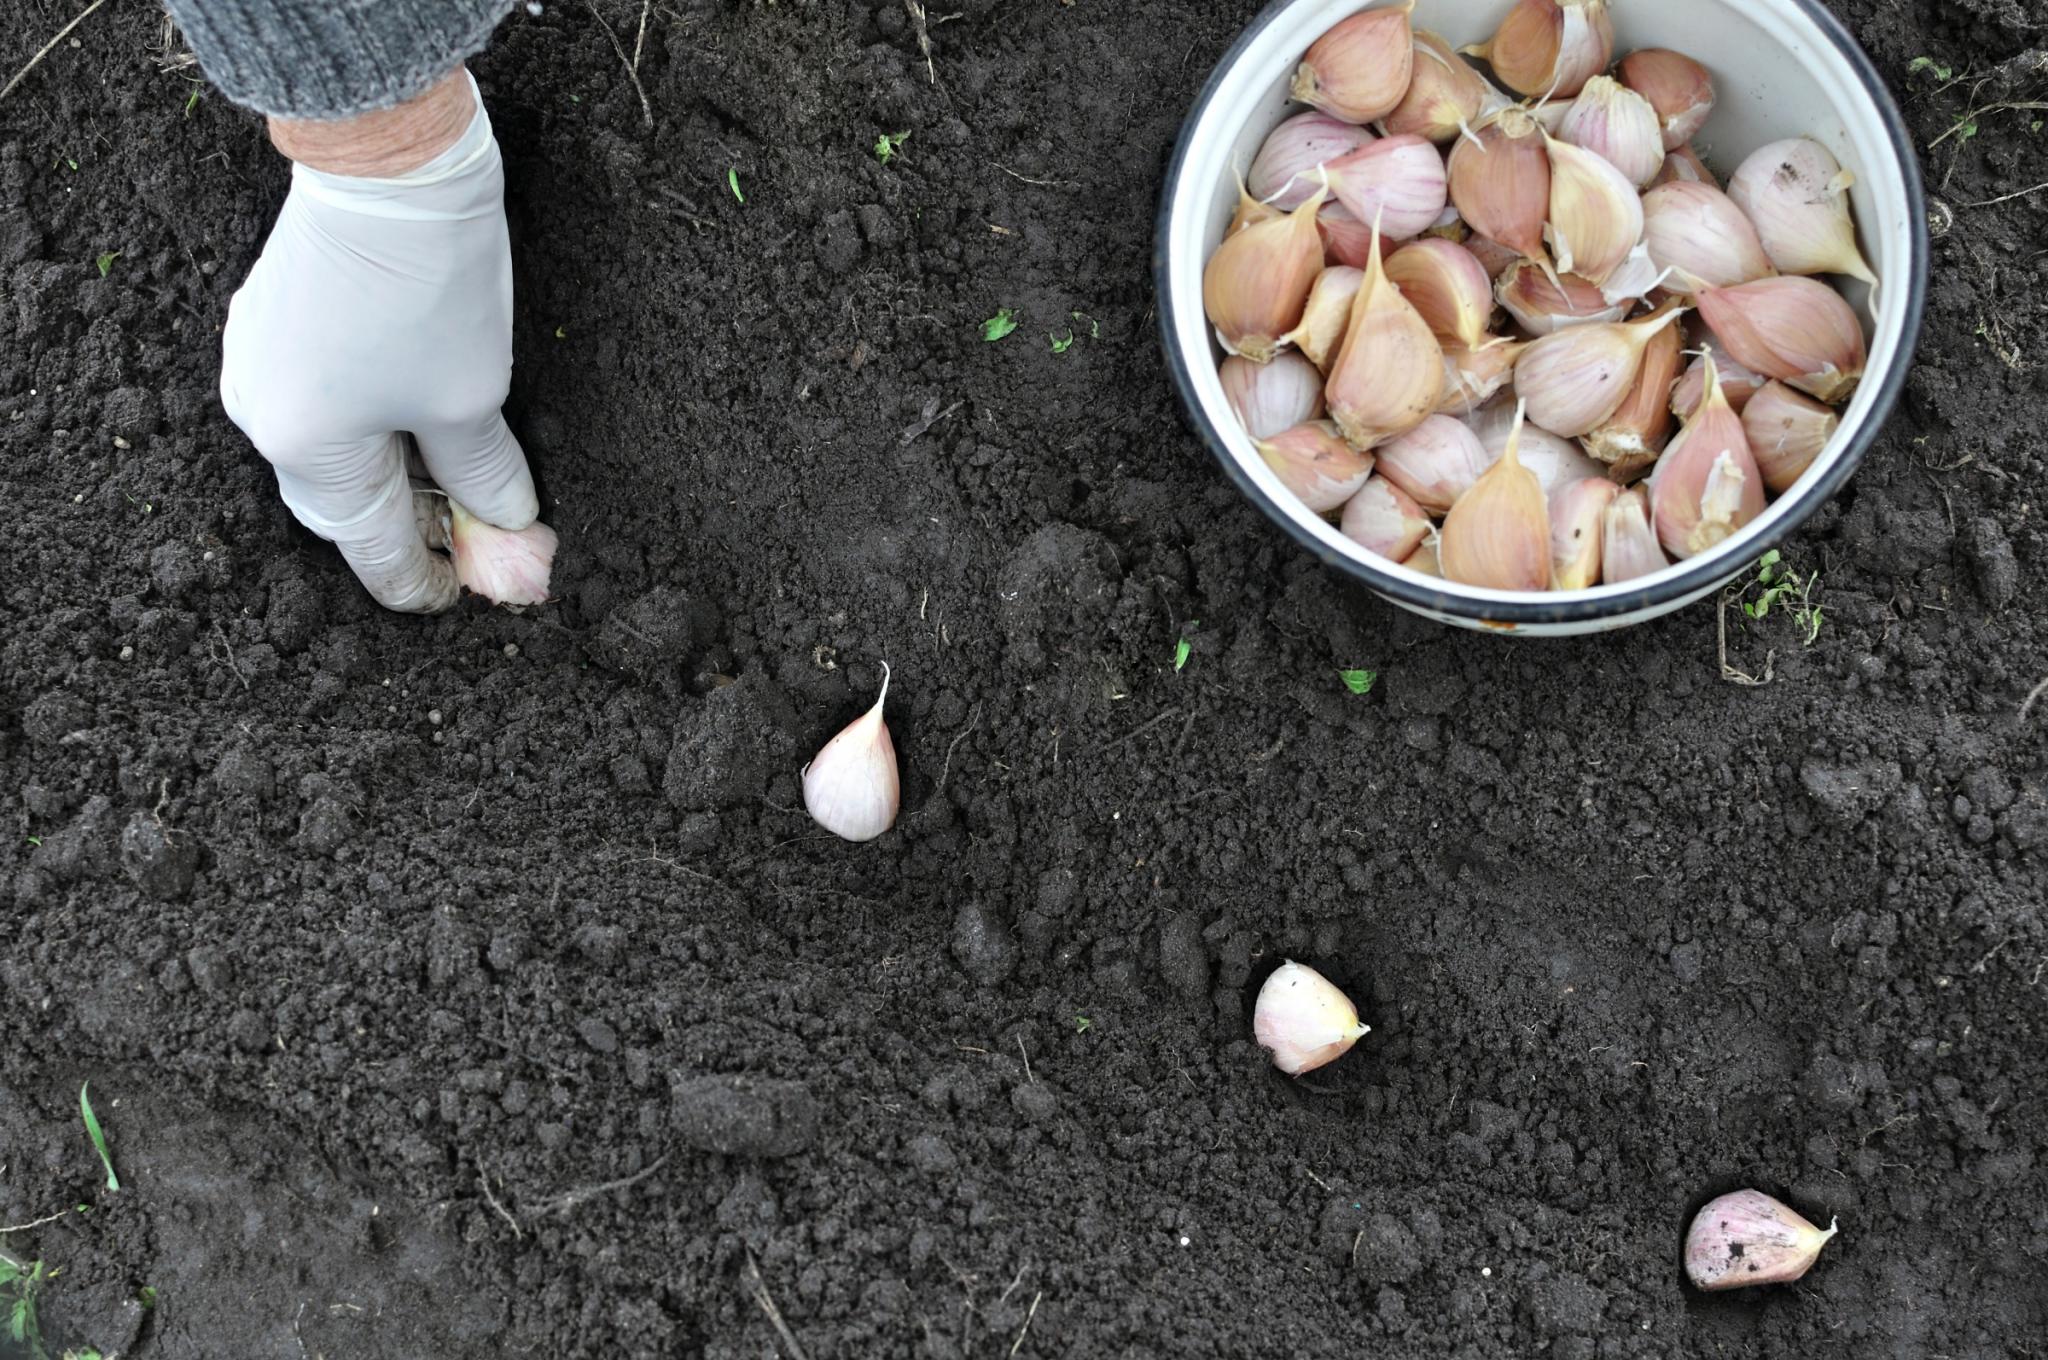 Planting garlic cloves. Photo by Yuriy S / Getty Images